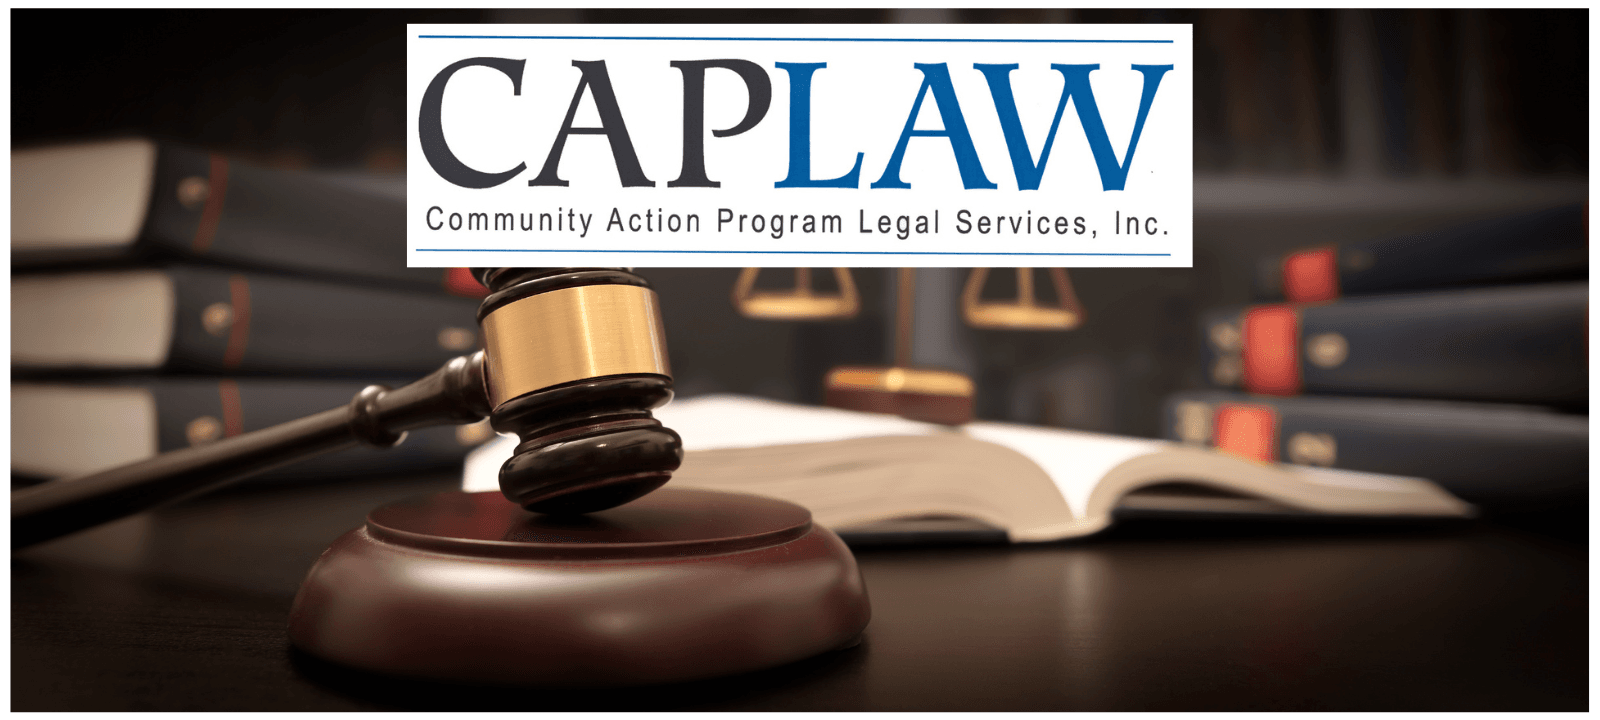 Join Us for a Special Region 8 CAPLaw Training!